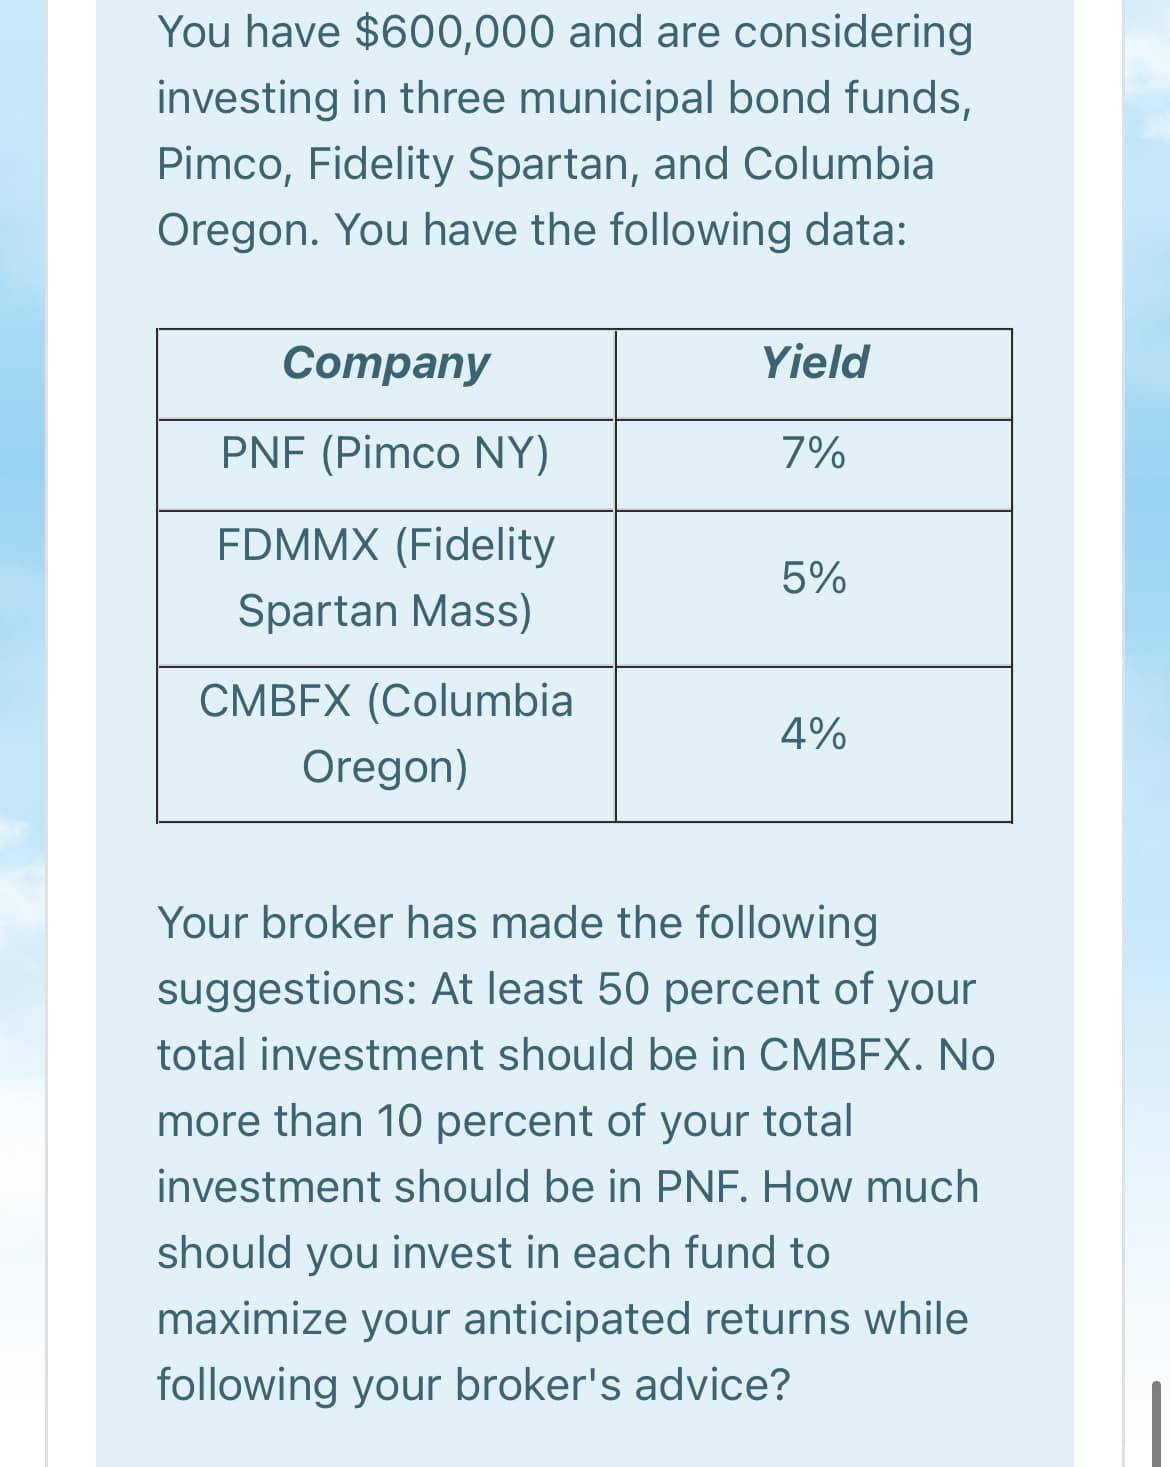 You have $600,000 and are considering
investing in three municipal bond funds,
Pimco, Fidelity Spartan, and Columbia
Oregon. You have the following data:
Соmpany
Yield
PNF (Pimco NY)
7%
FDMMX (Fidelity
5%
Spartan Mass)
CMBFX (Columbia
4%
Oregon)
Your broker has made the following
suggestions: At least 50 percent of your
total investment should be in CMBFX. No
more than 10 percent of your total
investment should be in PNF. How much
should you invest in each fund to
maximize your anticipated returns while
following your broker's advice?
